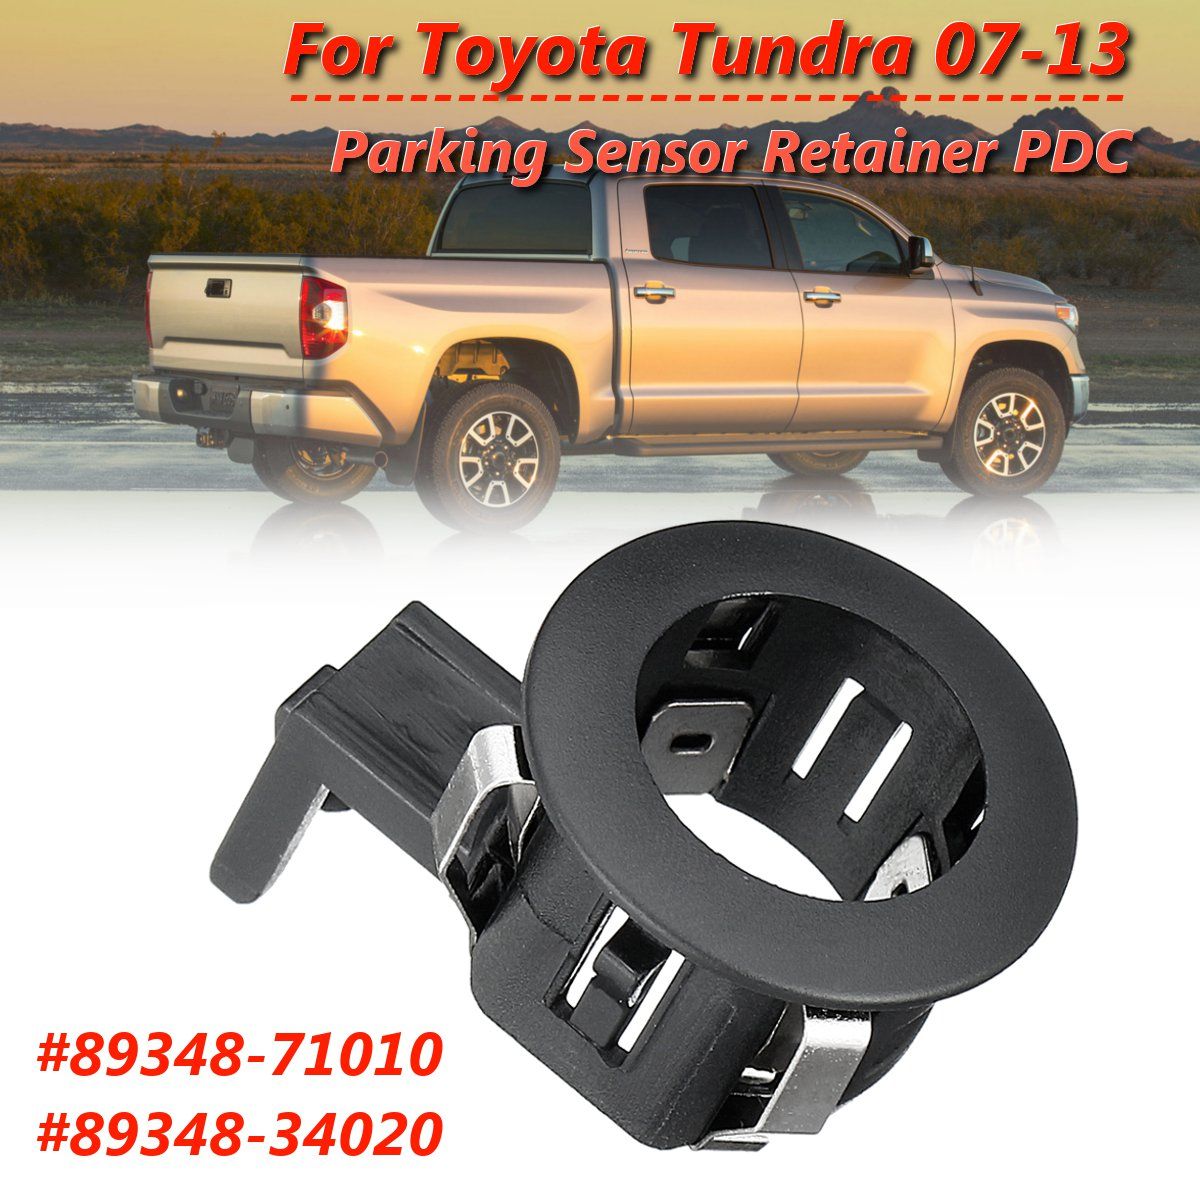 Parking-Sensor-Retainer-PDC-For-Toyota-Tundra-07-13-89348-71010-89348-34020-1584570